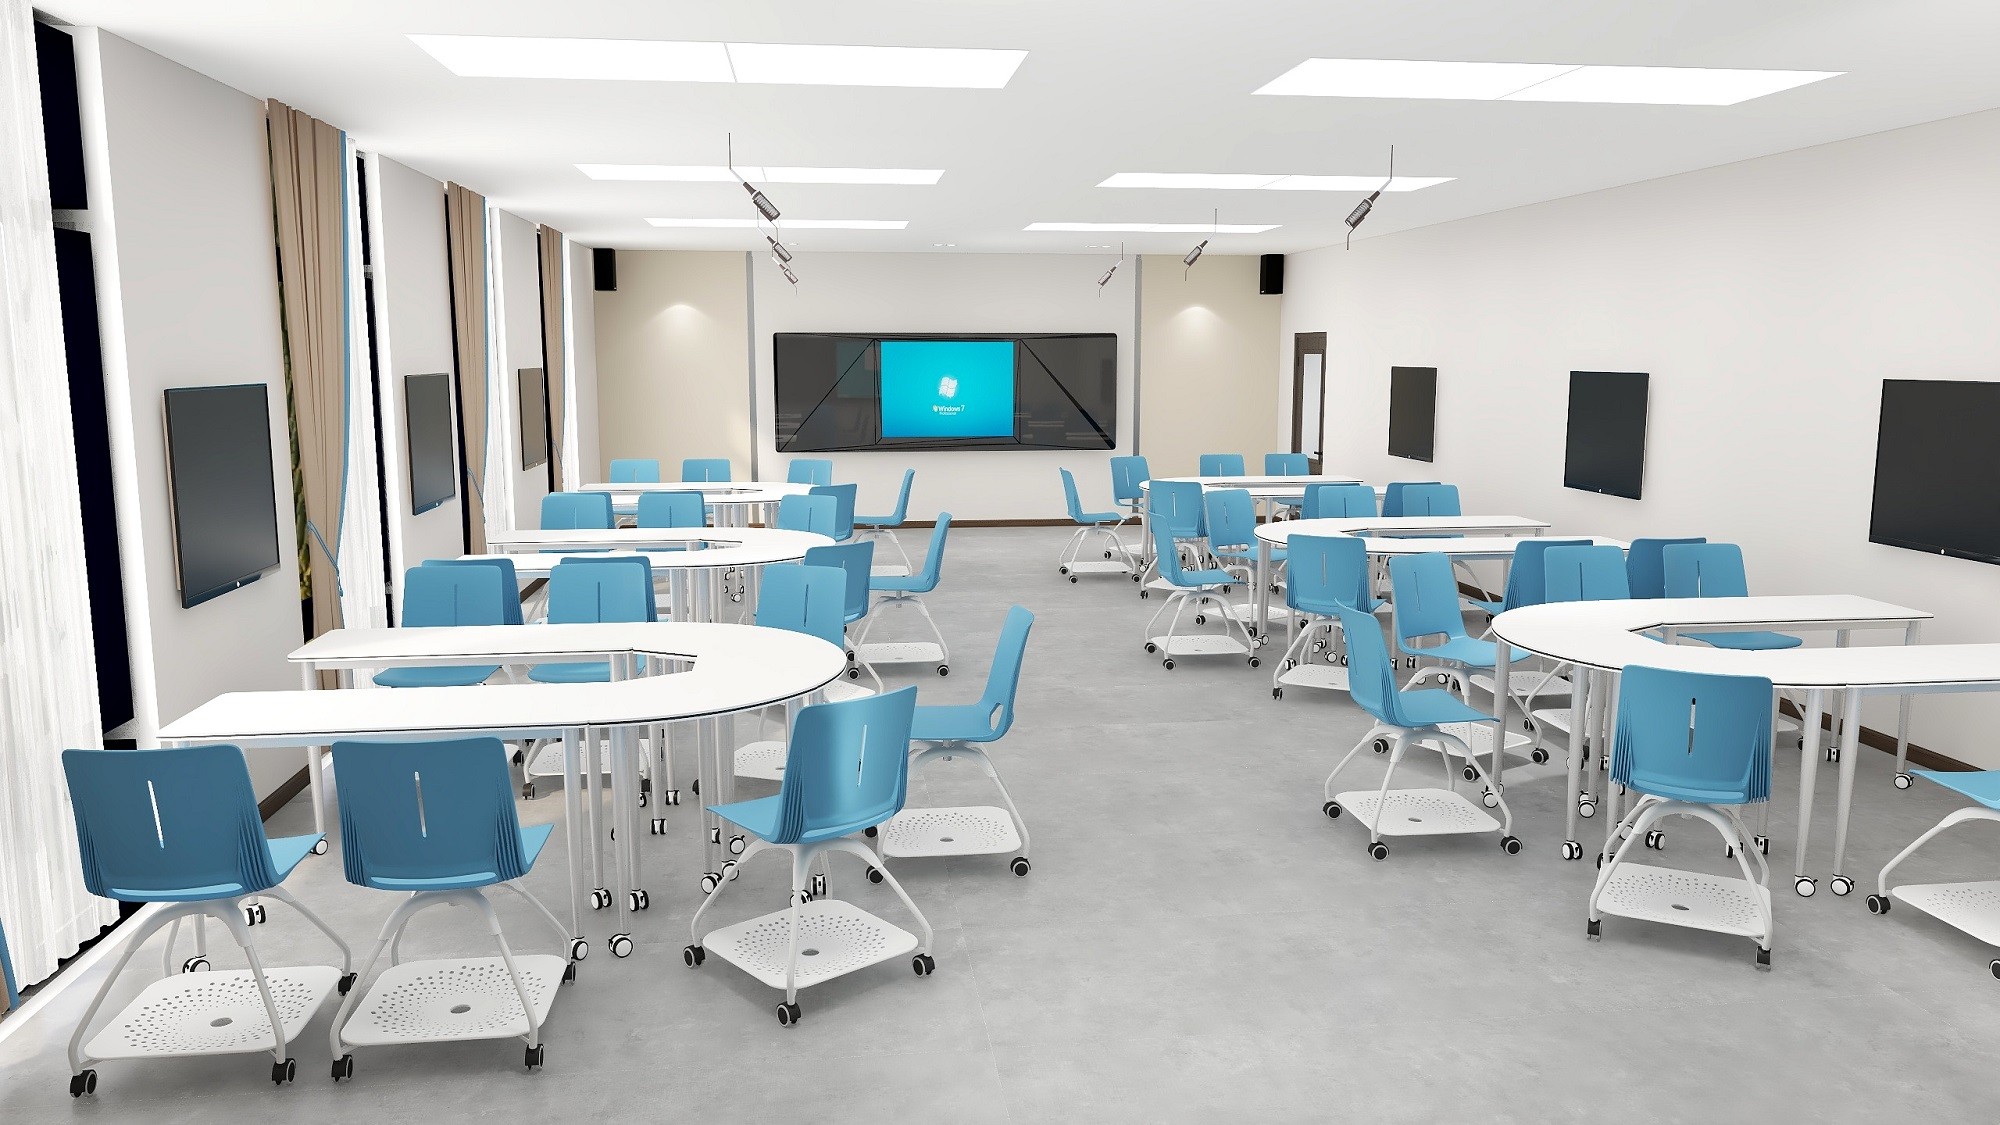 What are the advantages of smart classrooms?